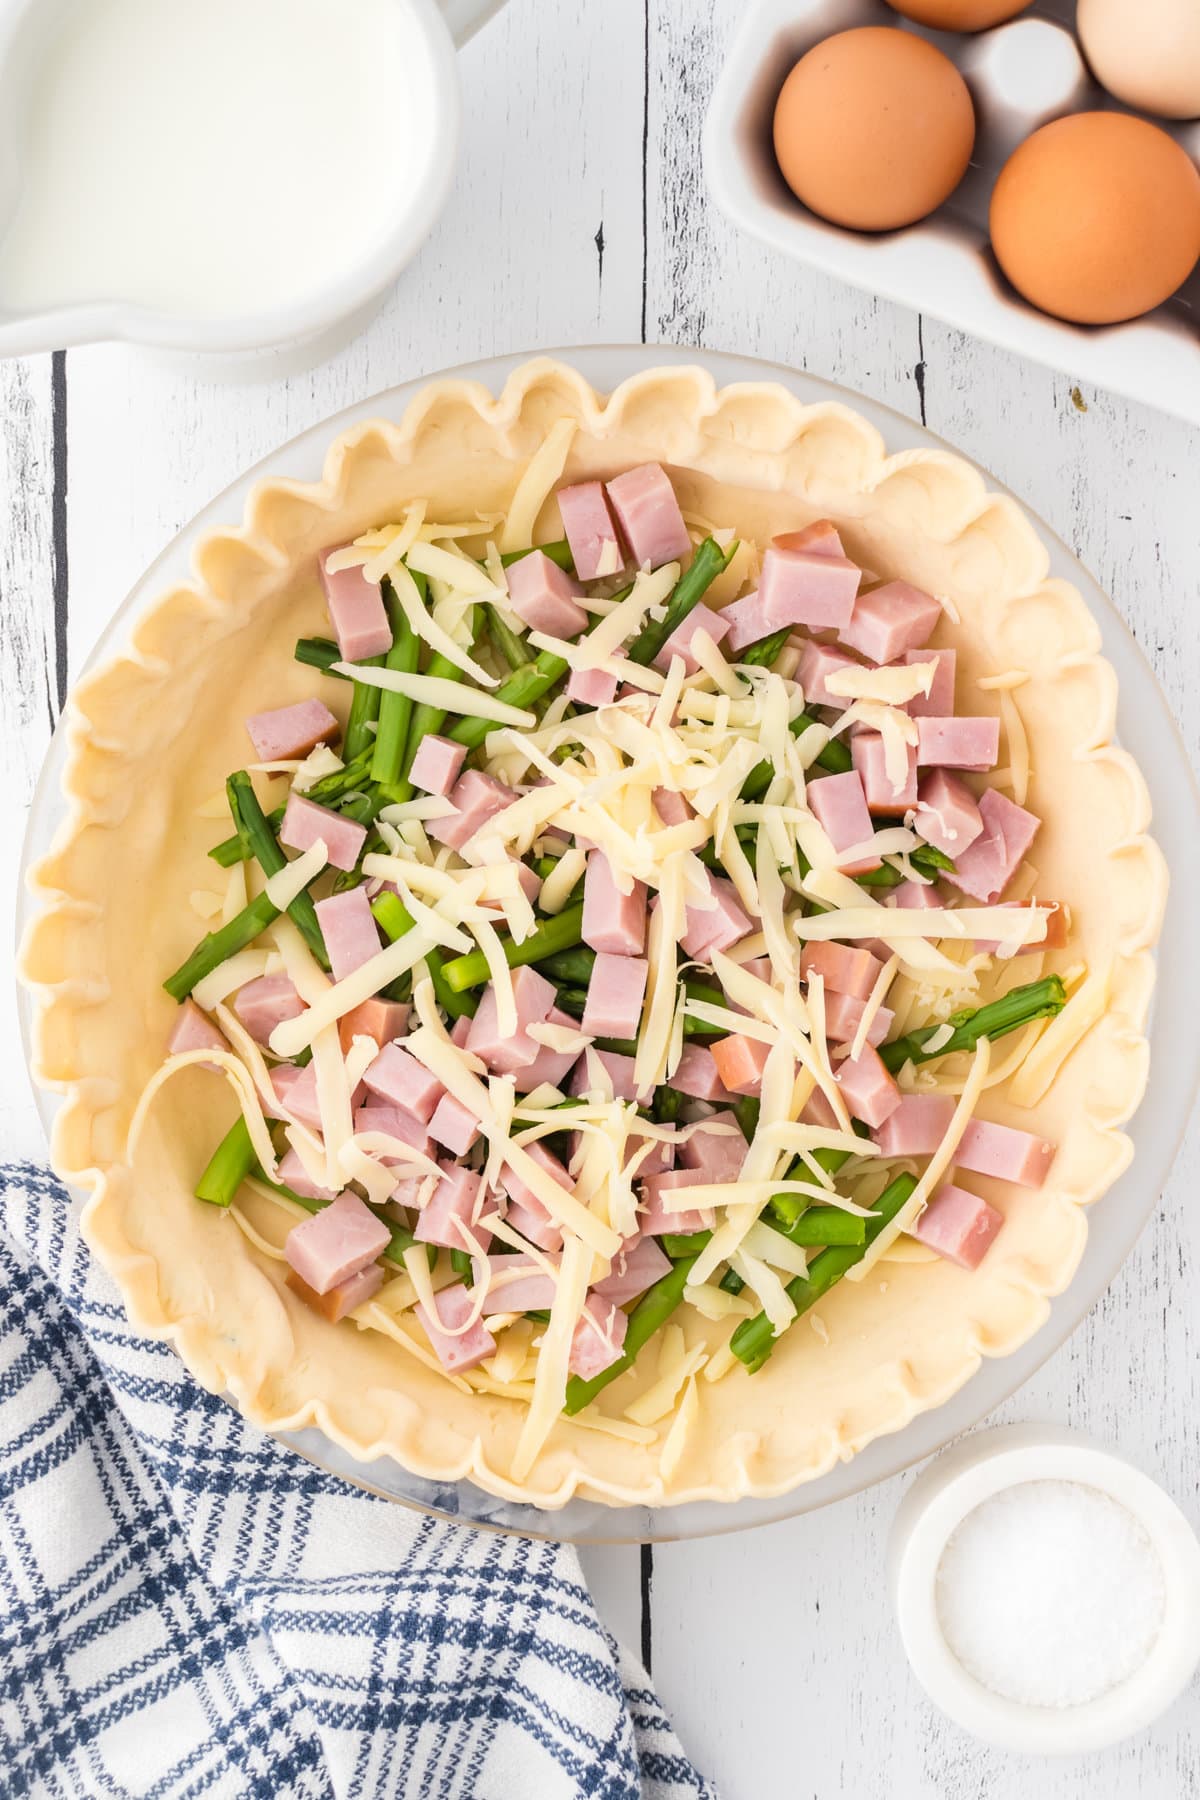 Ham, asparagus, and cheese in an uncooked pie crust.